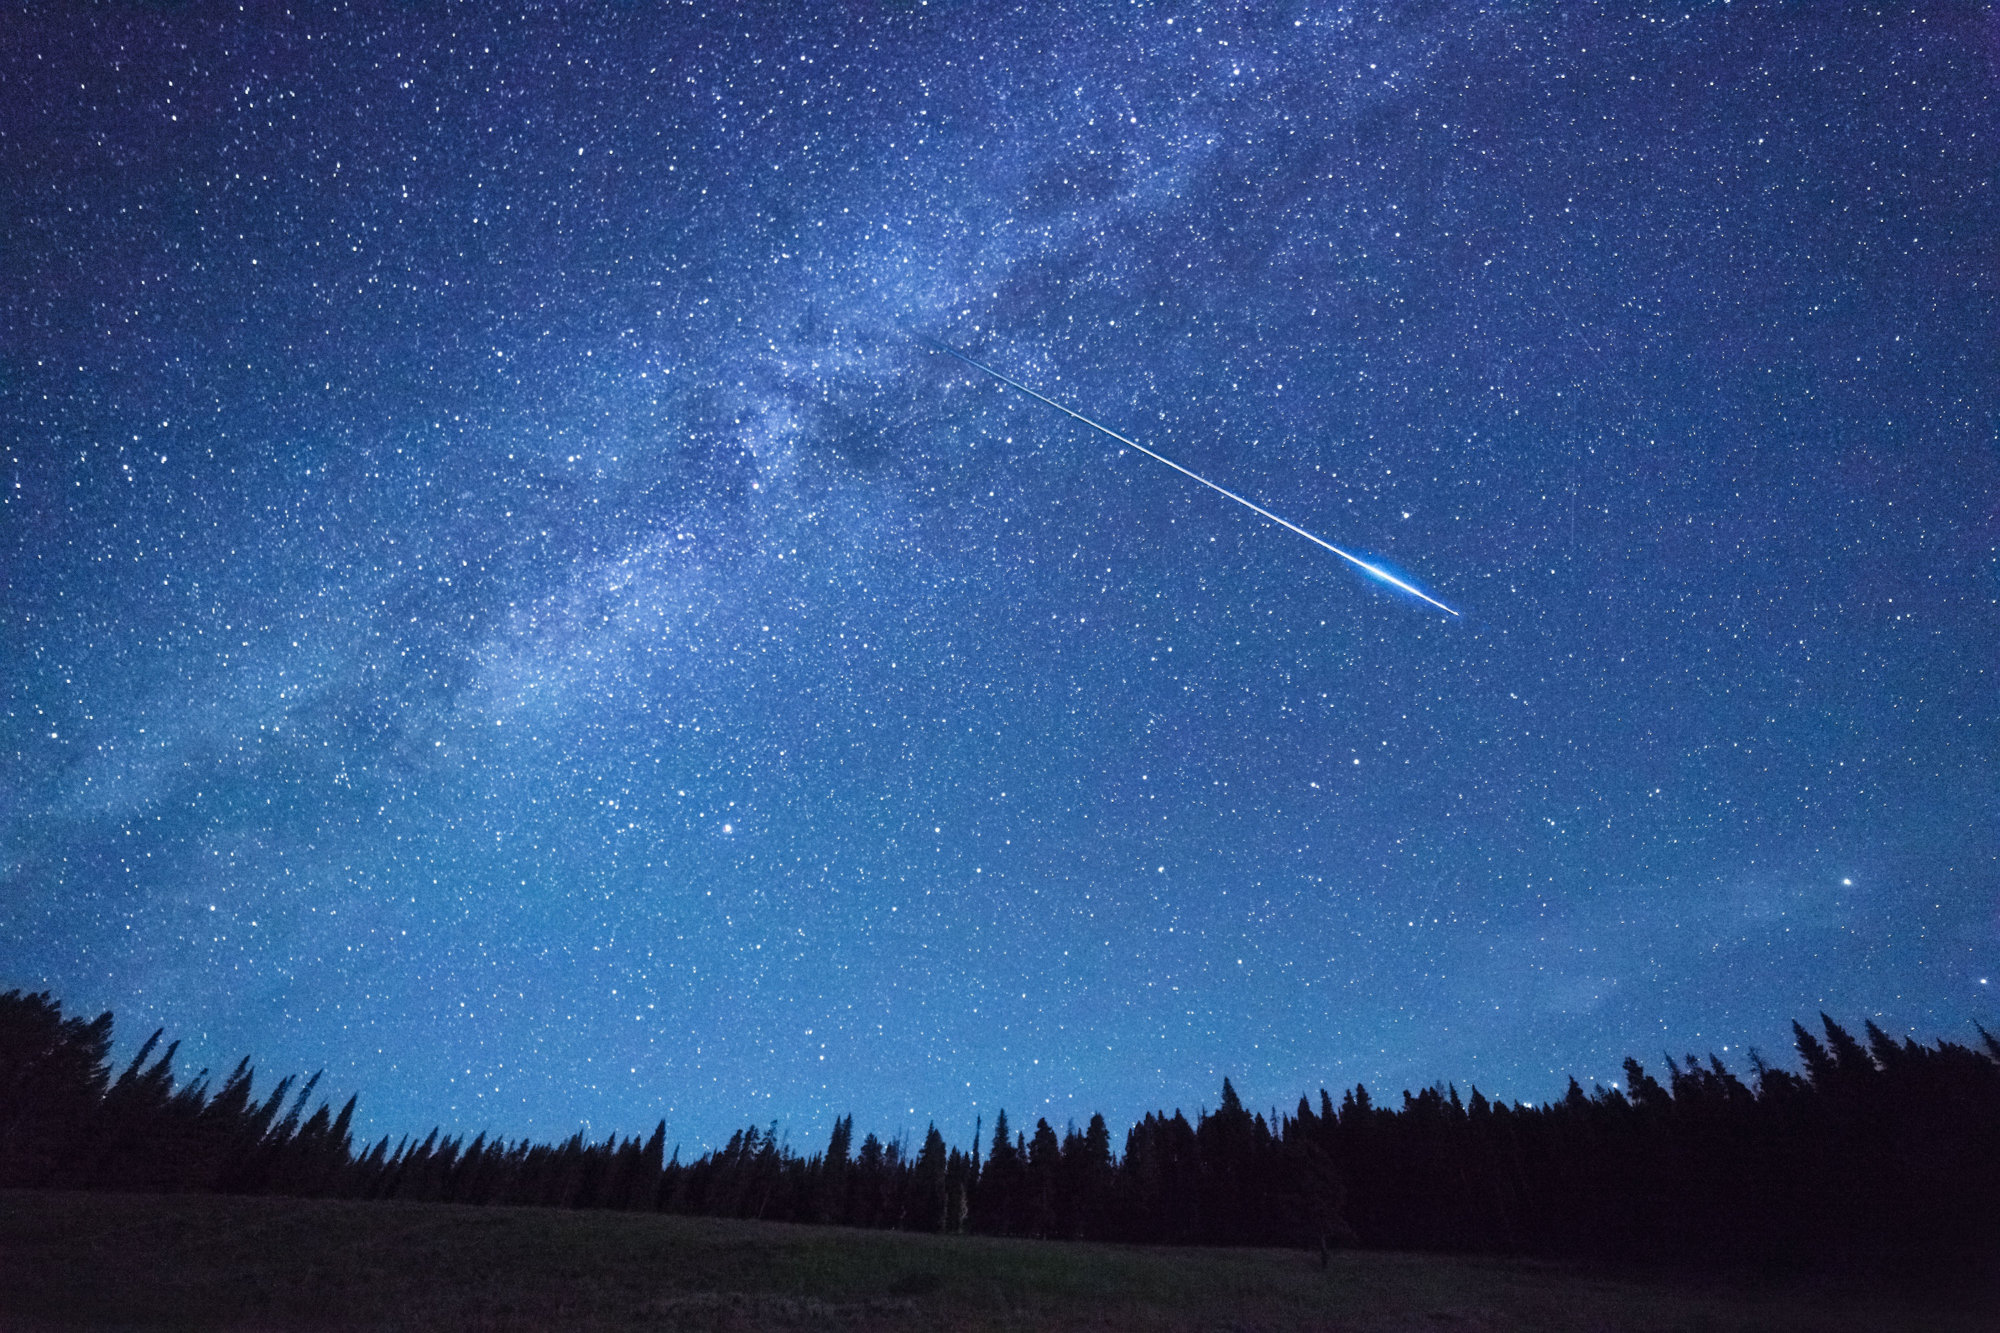 When to look up for the Lyrid meteor shower